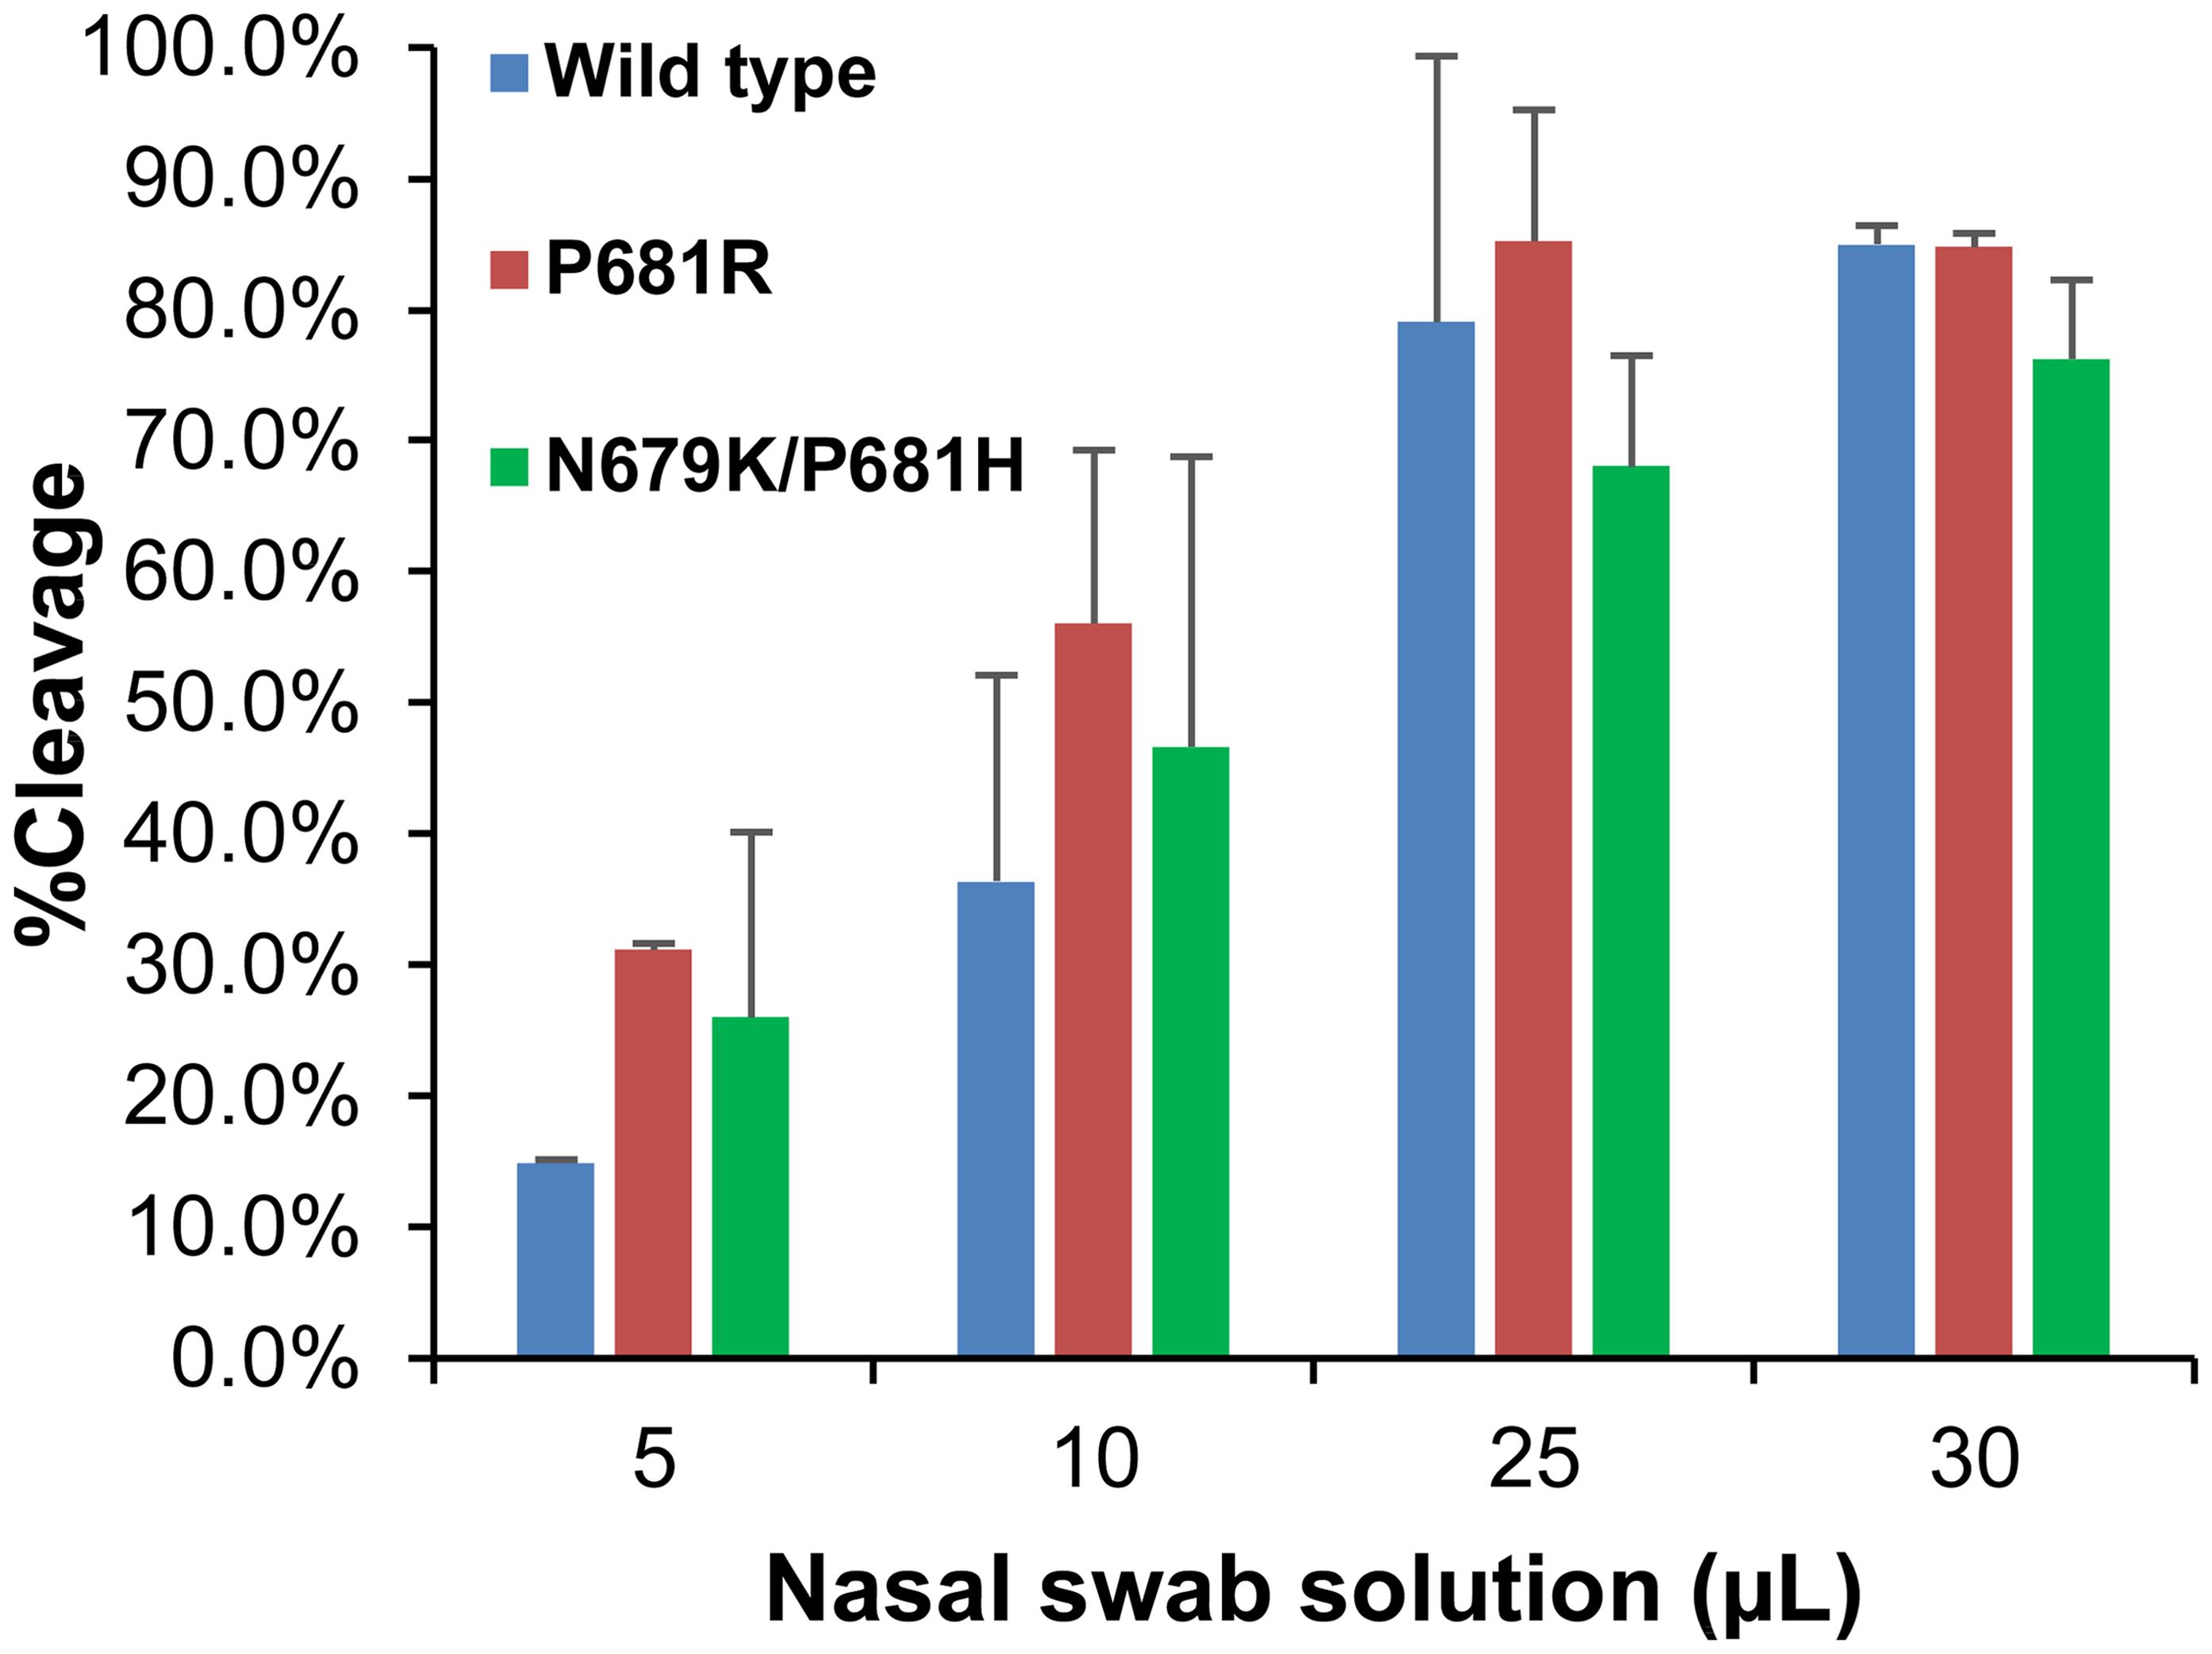 Cleavage of the SARS-CoV-2 wild-type, P681R, and N679K/P681H mutant FCS by the nasal swab sample at different amounts. NO significant difference of the cleavage level (<italic>p</italic> > 0.05) caused by the nasal swab sample among the wild-type, P681R, and N679K/P681H mutants.